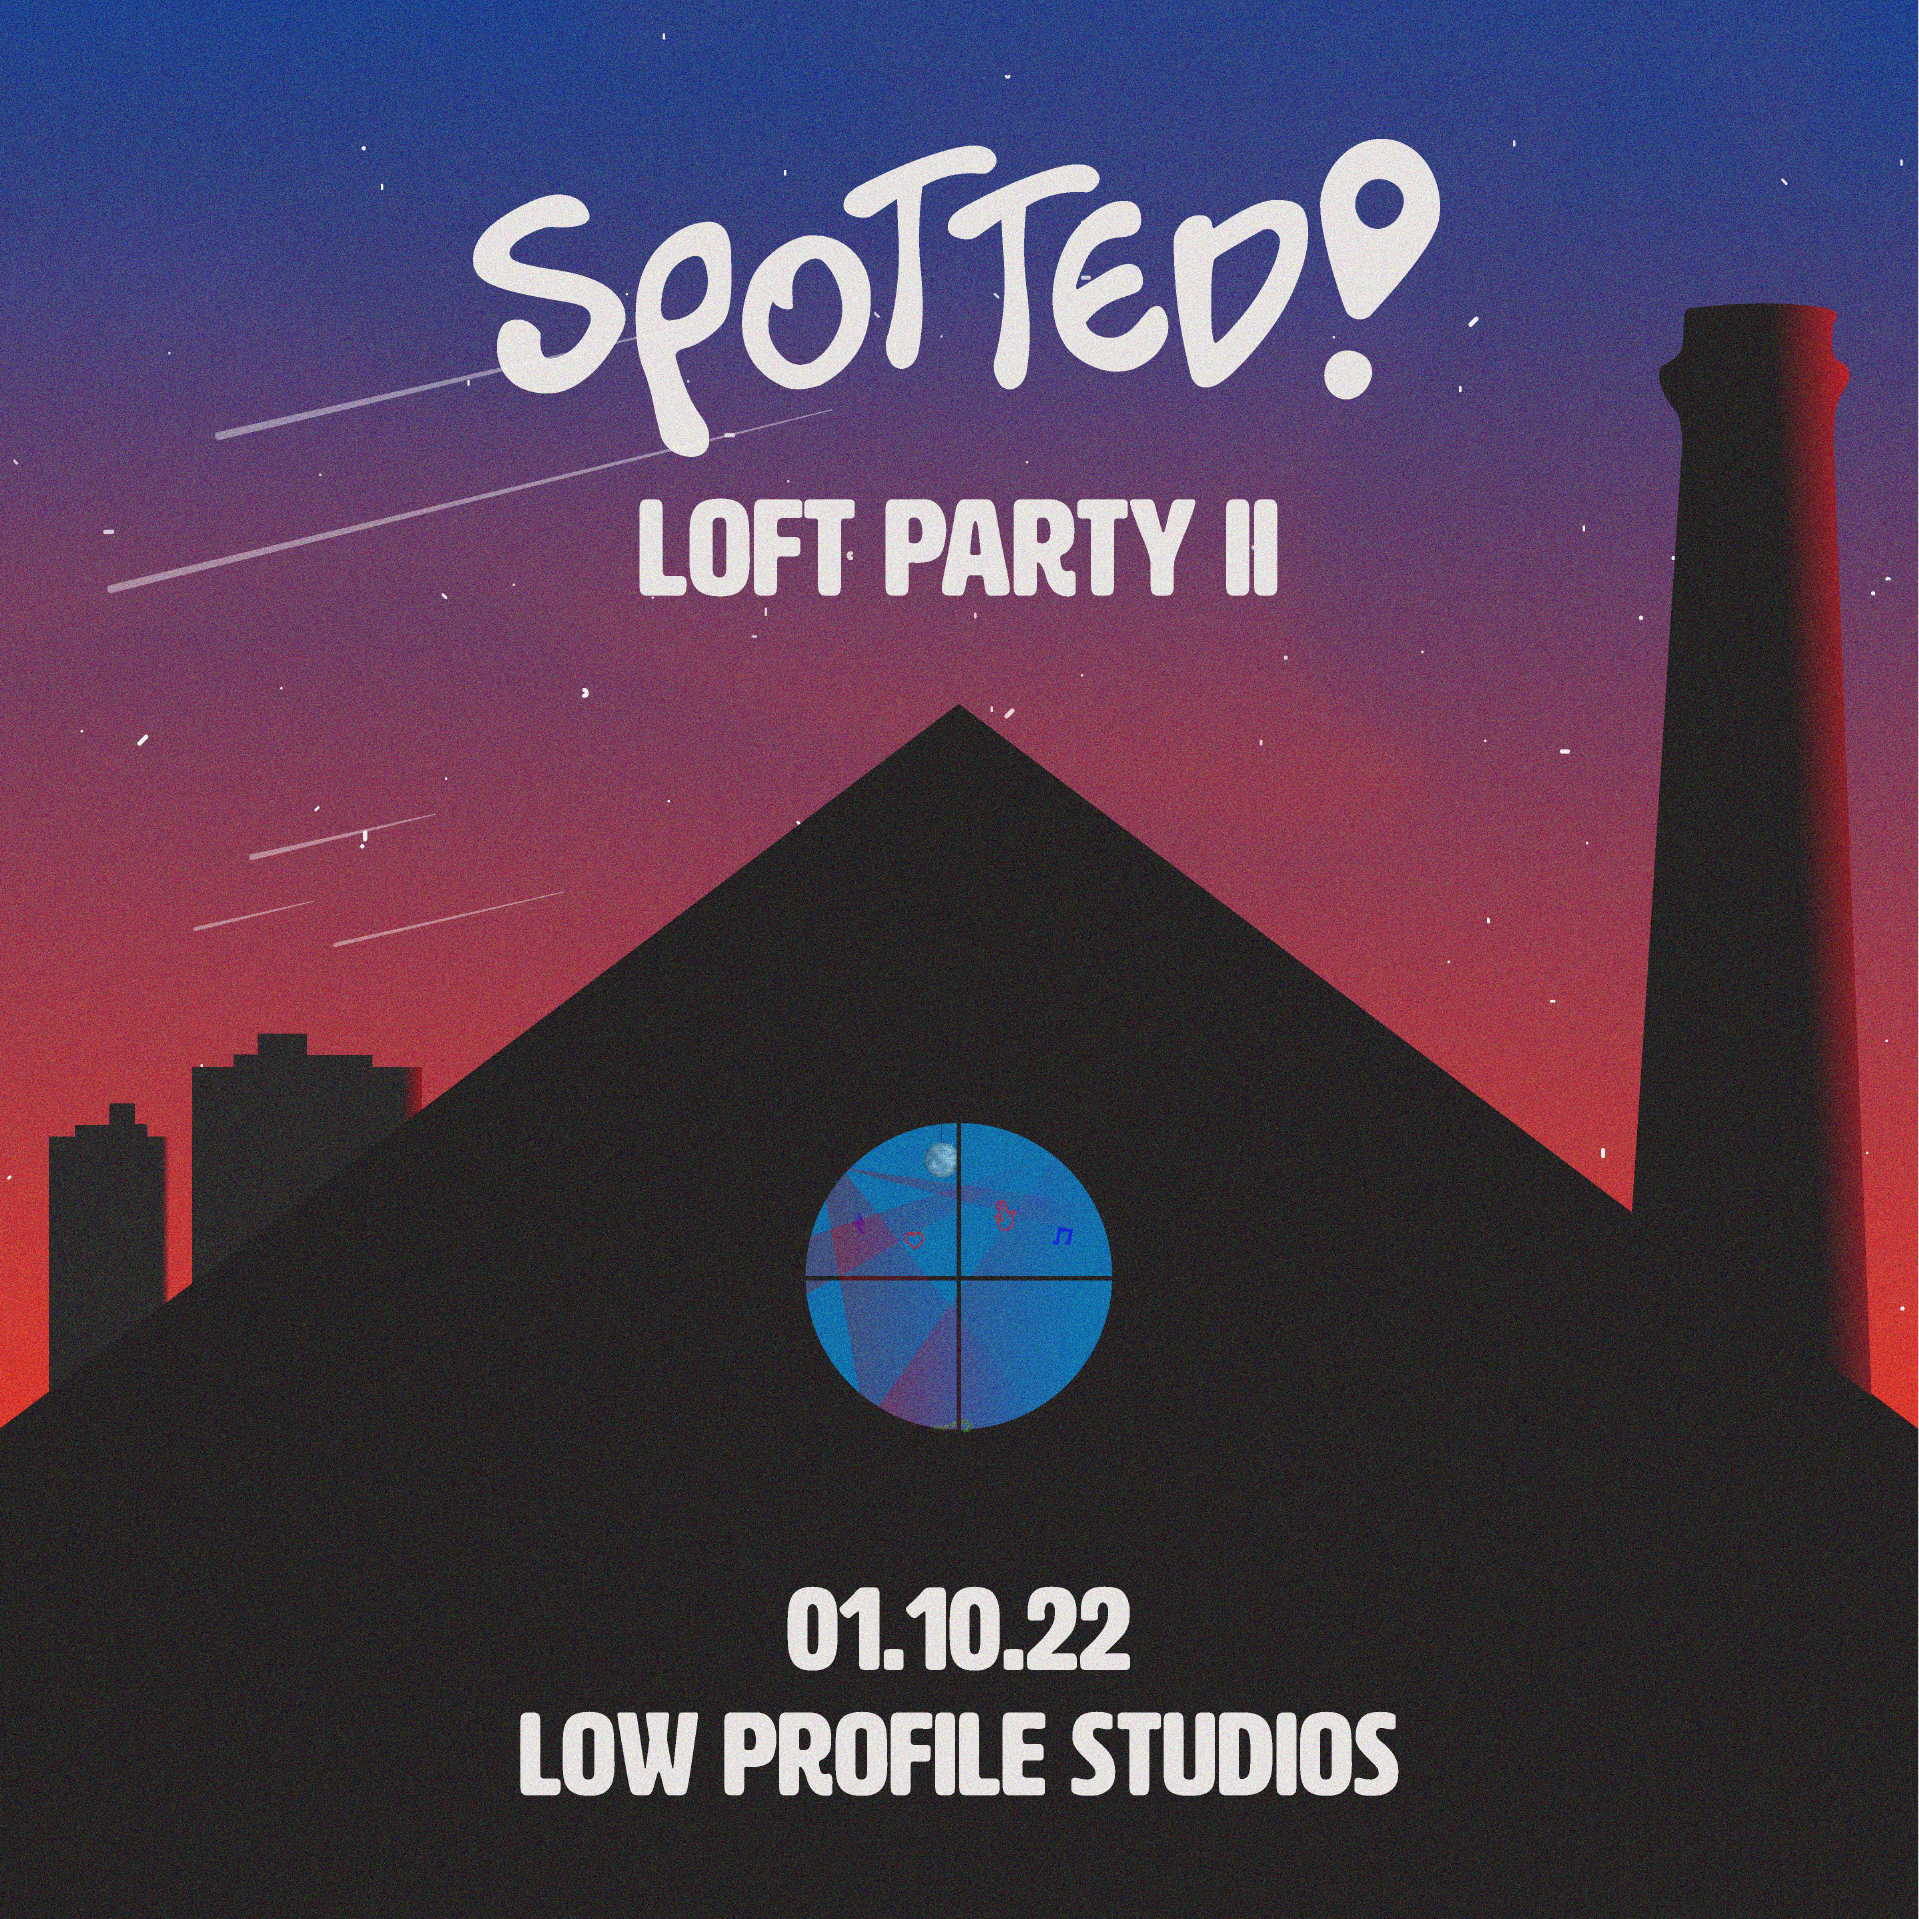 Spotted Loft Party (Postponed) - フライヤー表